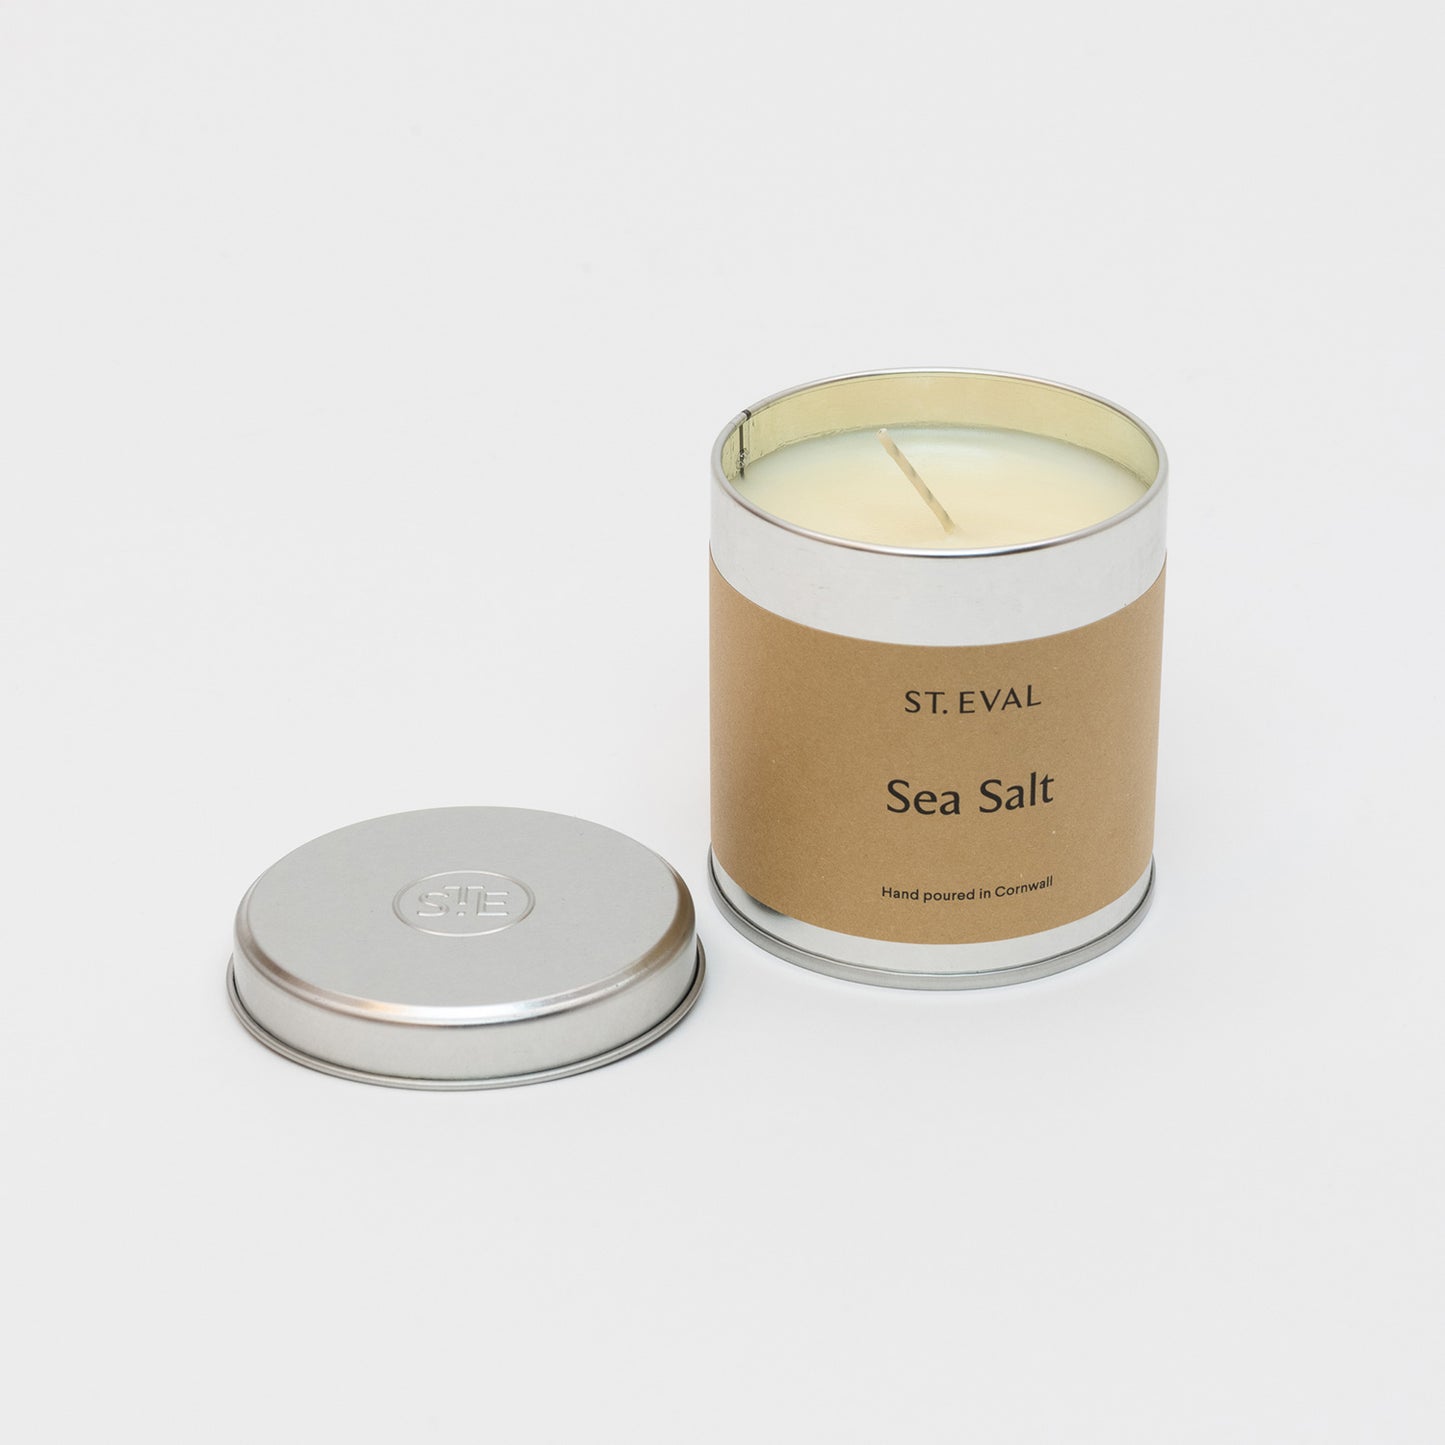 St Eval Sea Salt Candle Tin with tin lid by side.. Plain earthy card label with St. Eval, Sea Salt, Made in Cornwall. Cream white candle with standing wick.